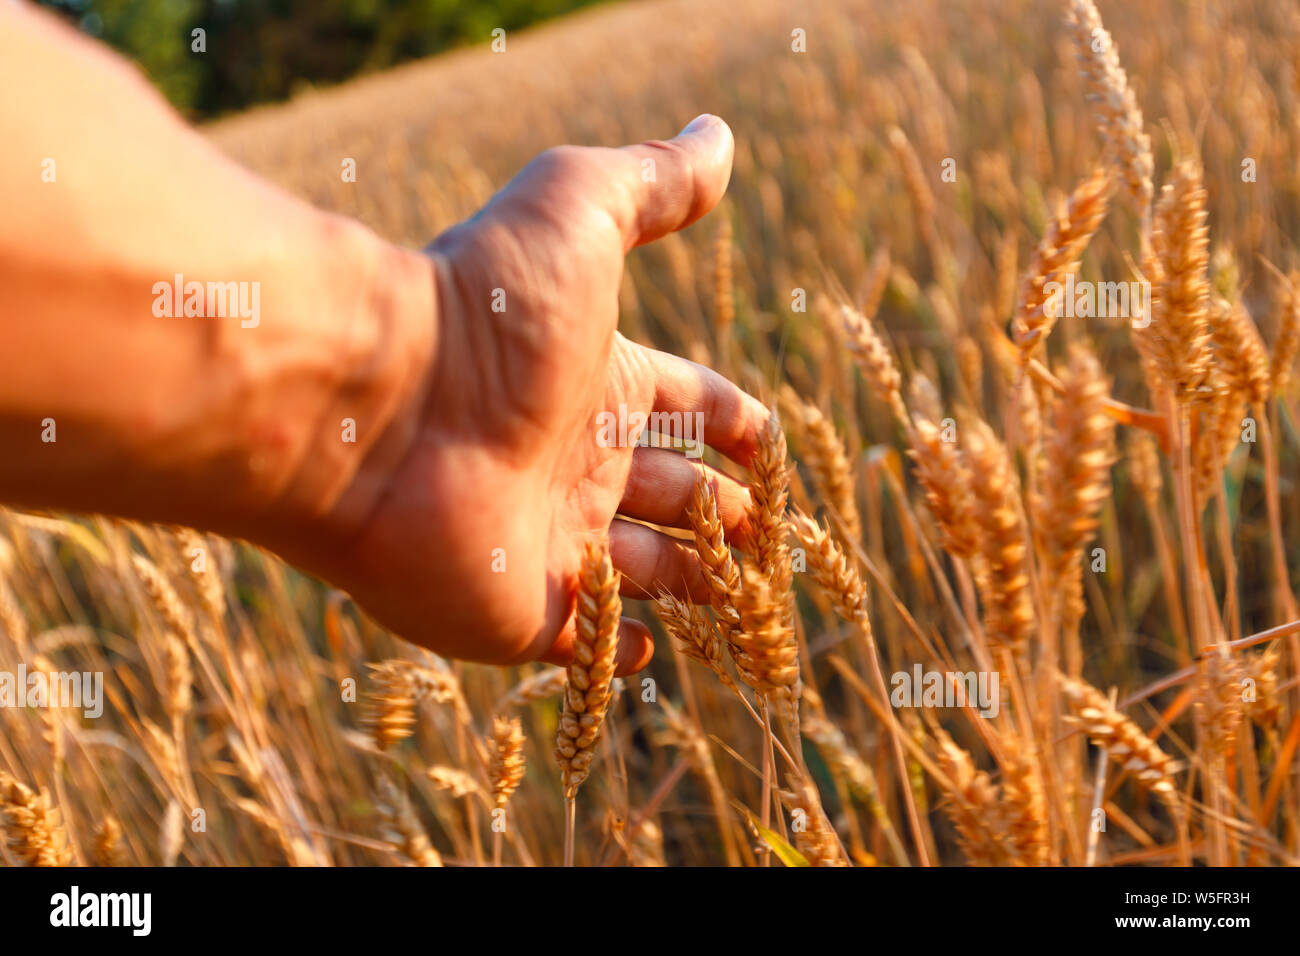 Farmers hand touches the ear of wheat at sunset. The agriculturist inspects a field of ripe wheat. farmer on wheat field at sunset. Stock Photo